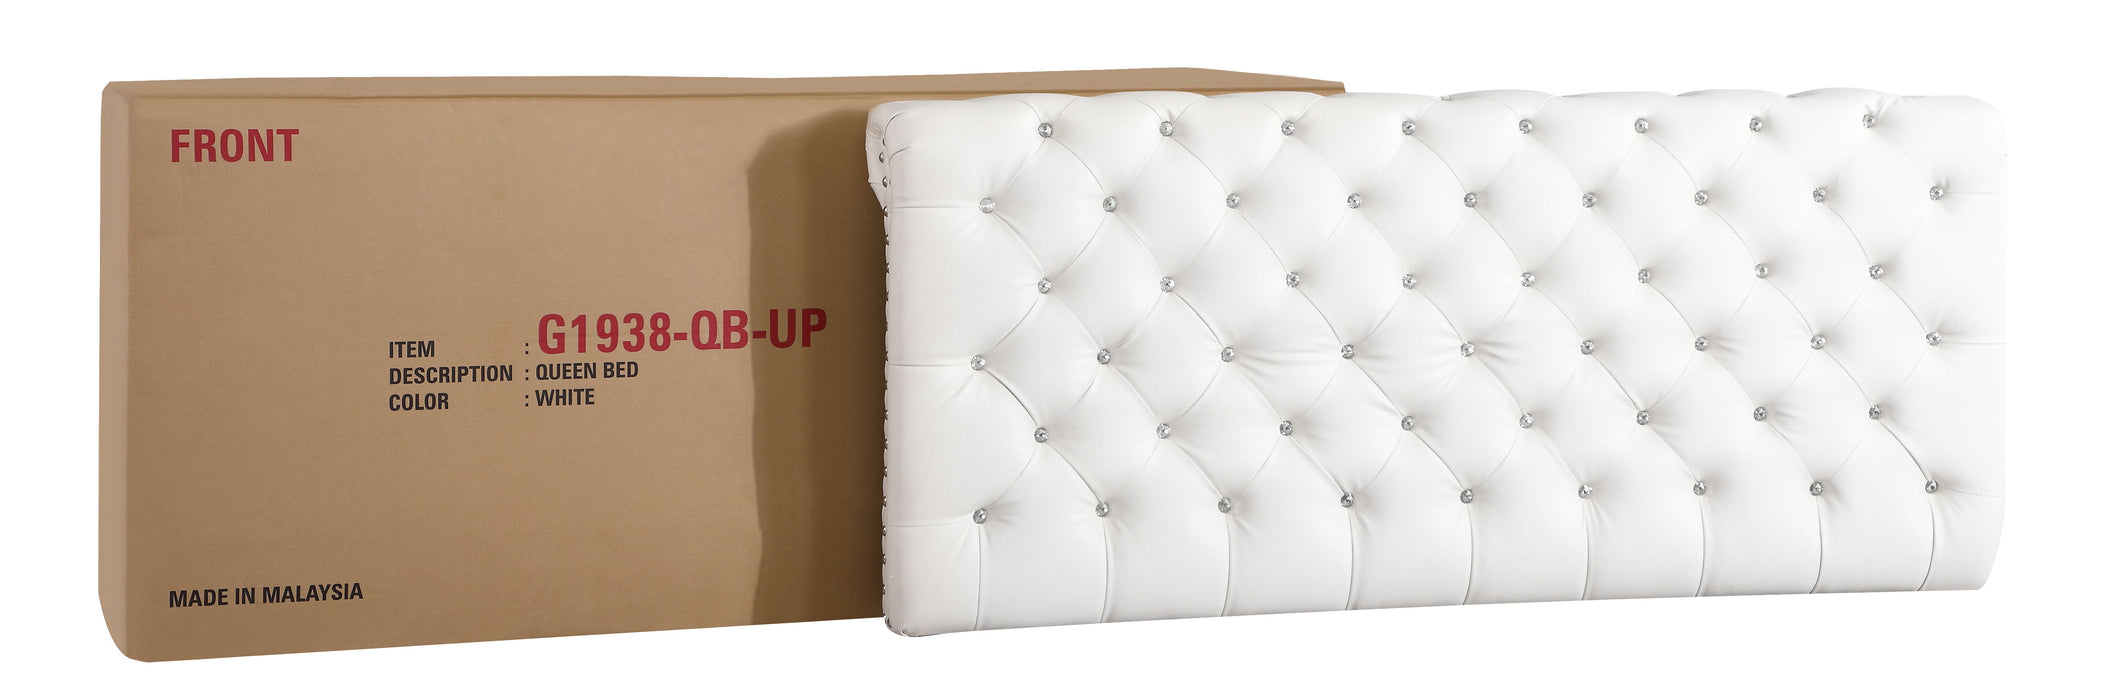 Maxx - G1938-QB-UP Tufted Upholstered Bed - White